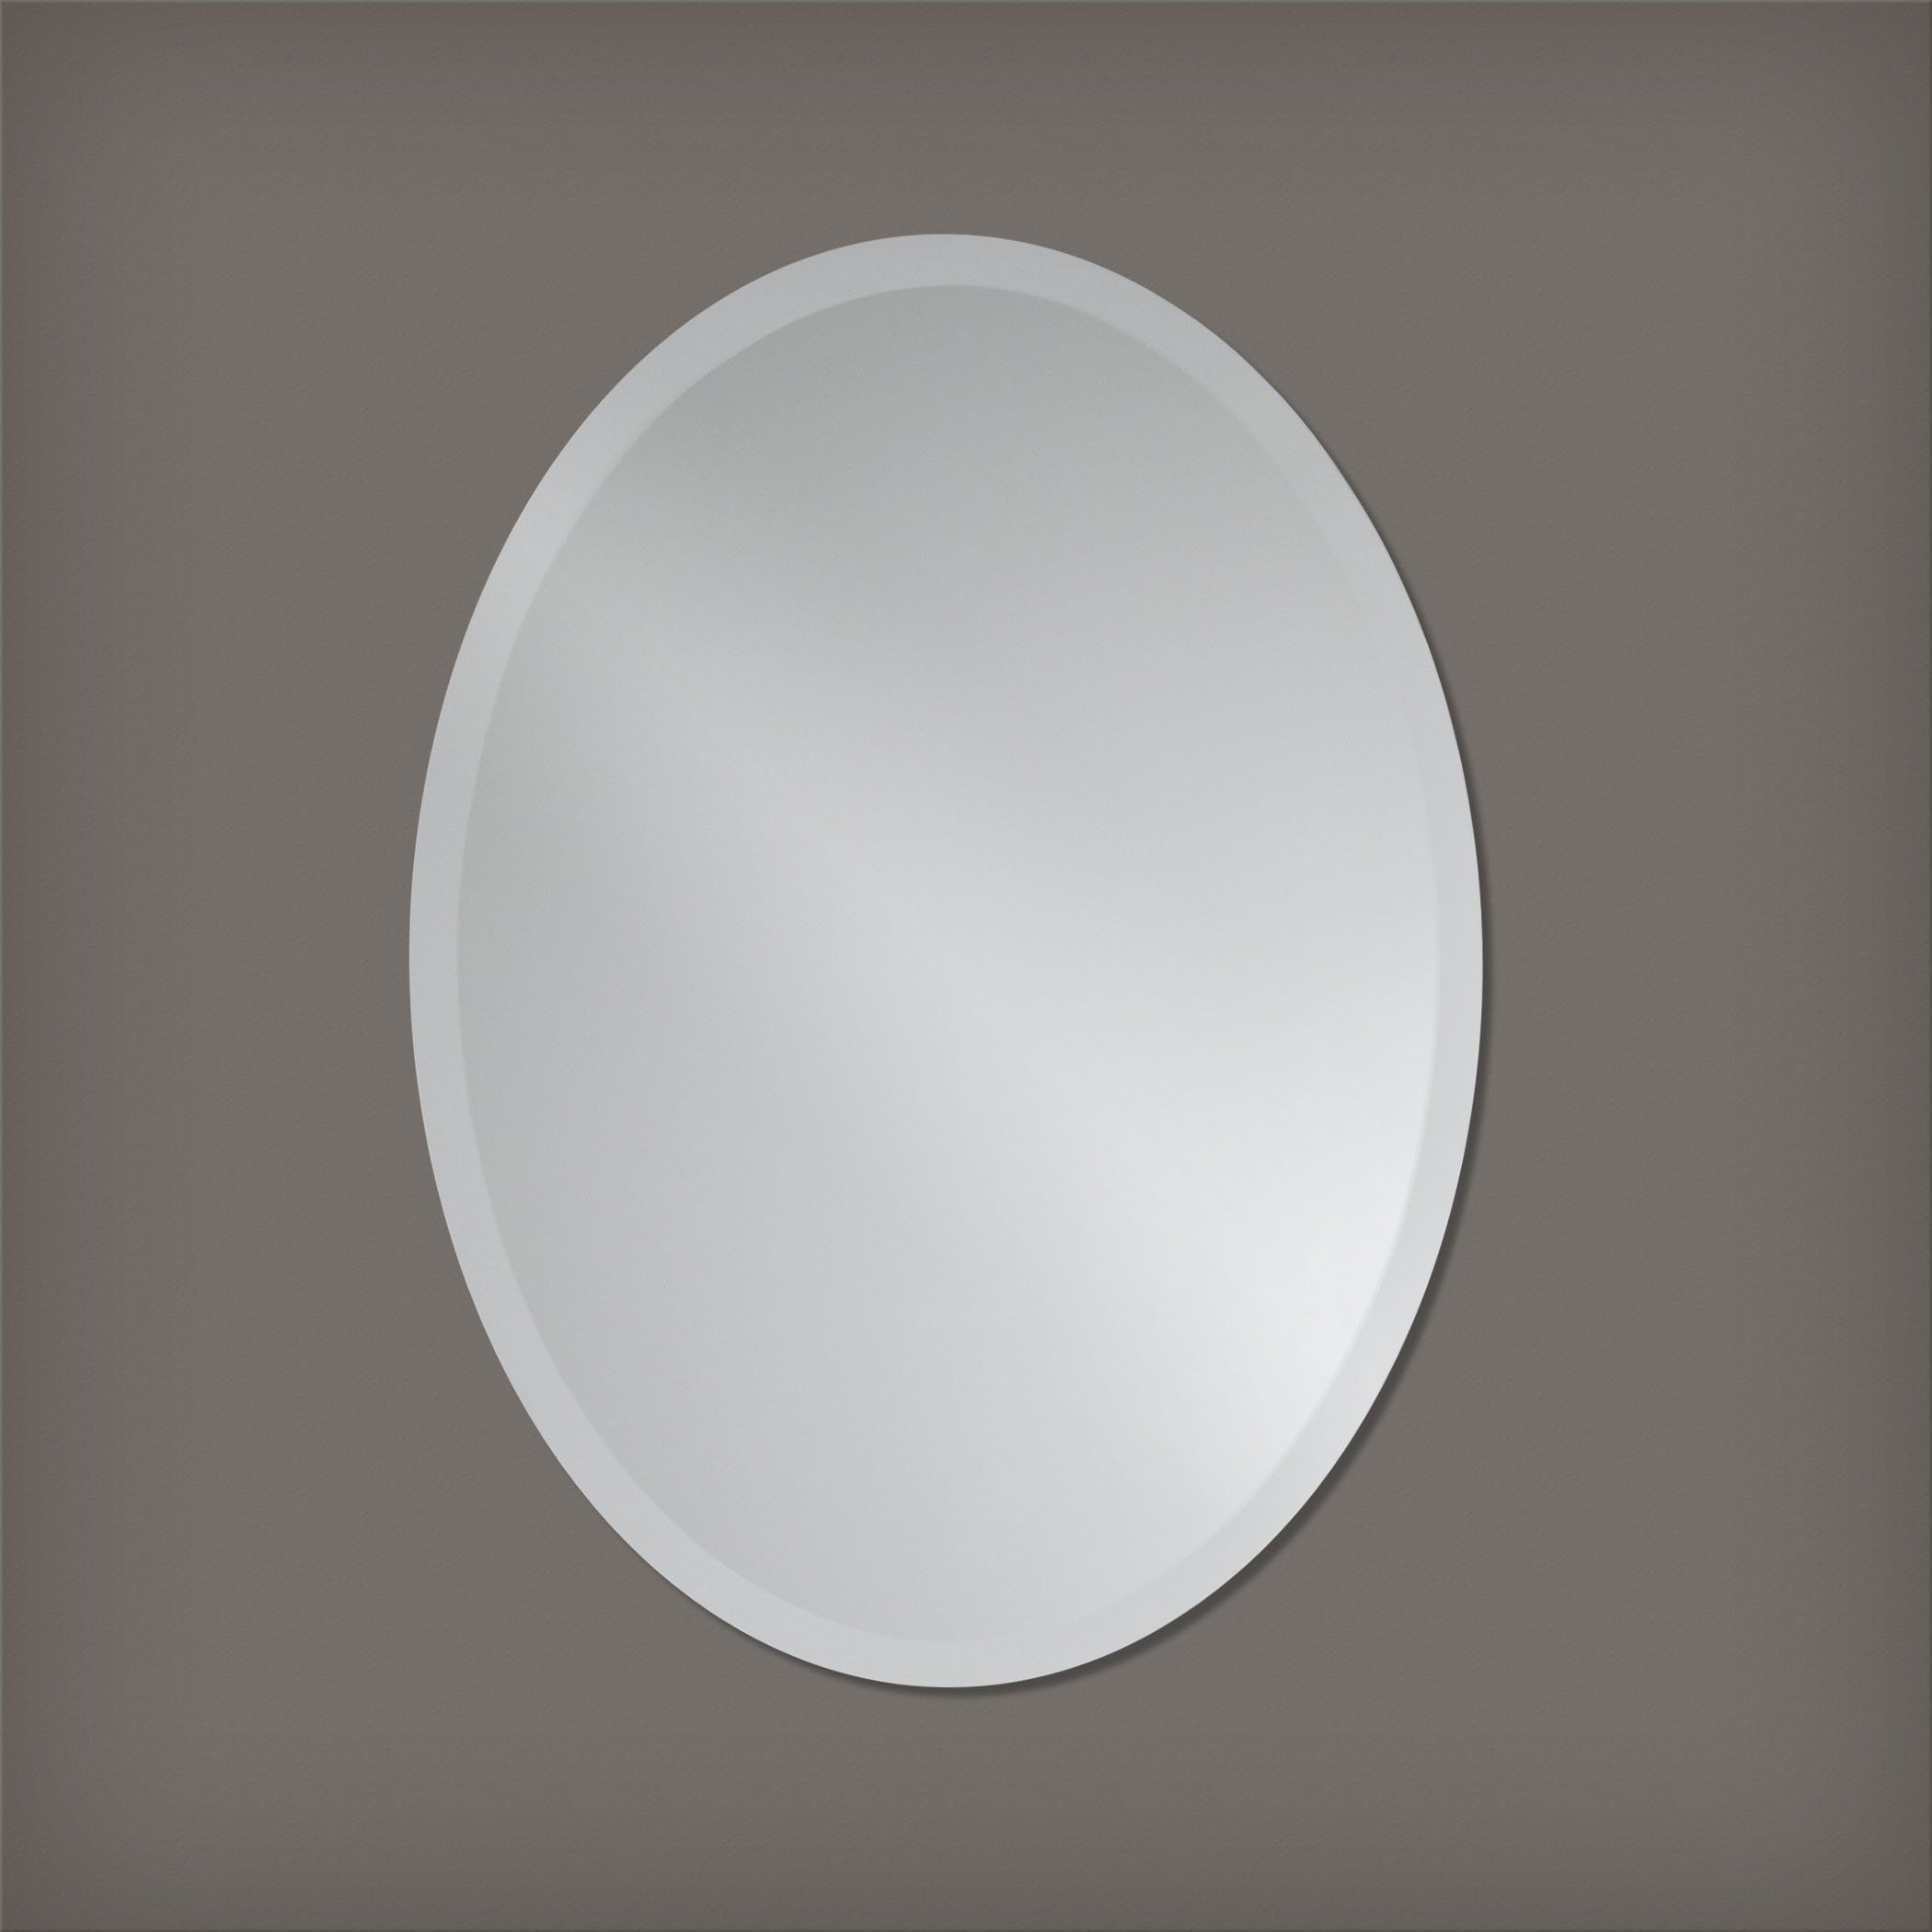 Small Frameless Beveled Oval Wall Mirror Bathroom Vanity Bedroom Mirror Inside Oval Frameless Led Wall Mirrors (View 15 of 15)